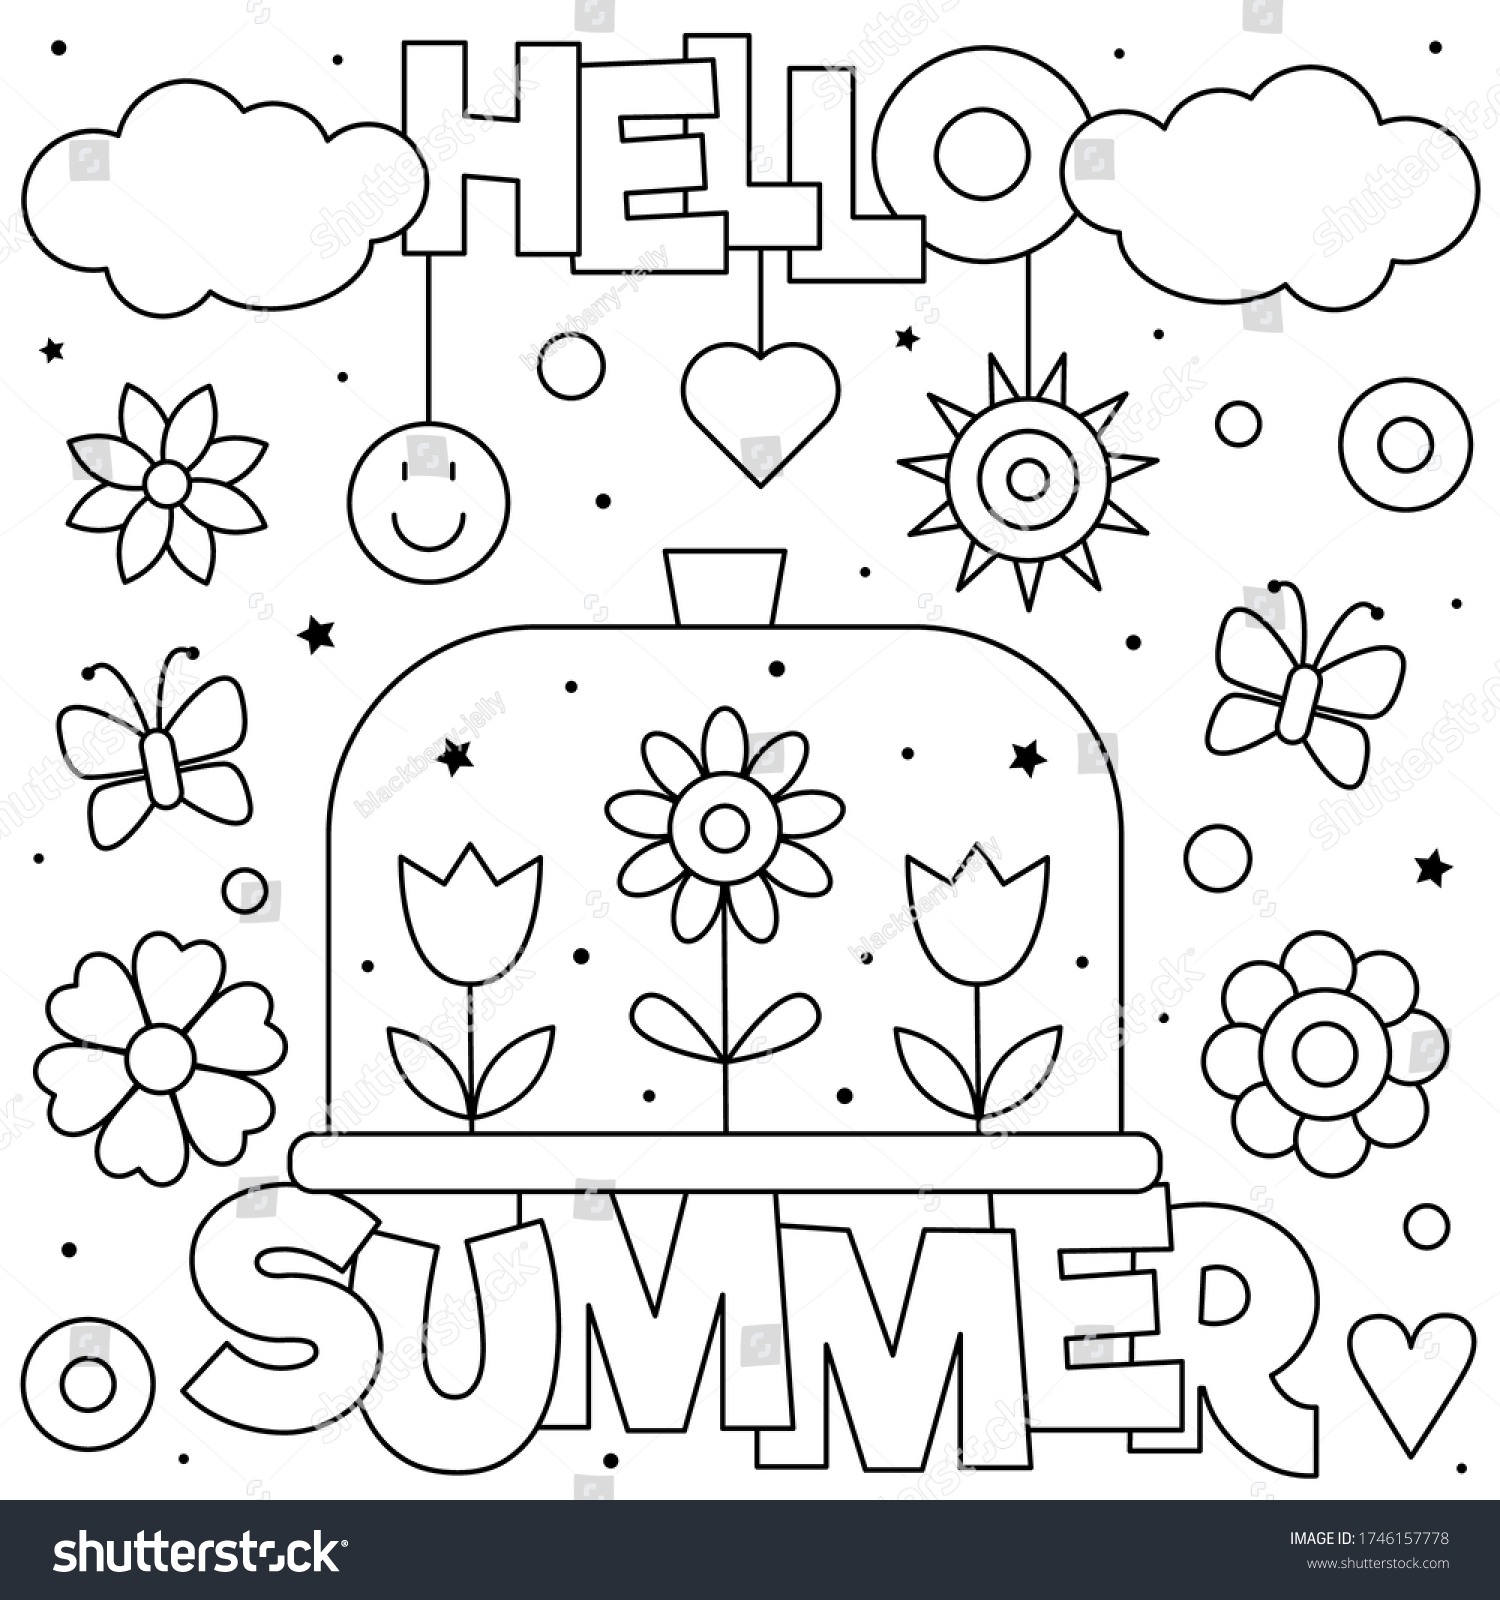 Hello Summer Coloring Page Black White Stock Vector (Royalty Free ...